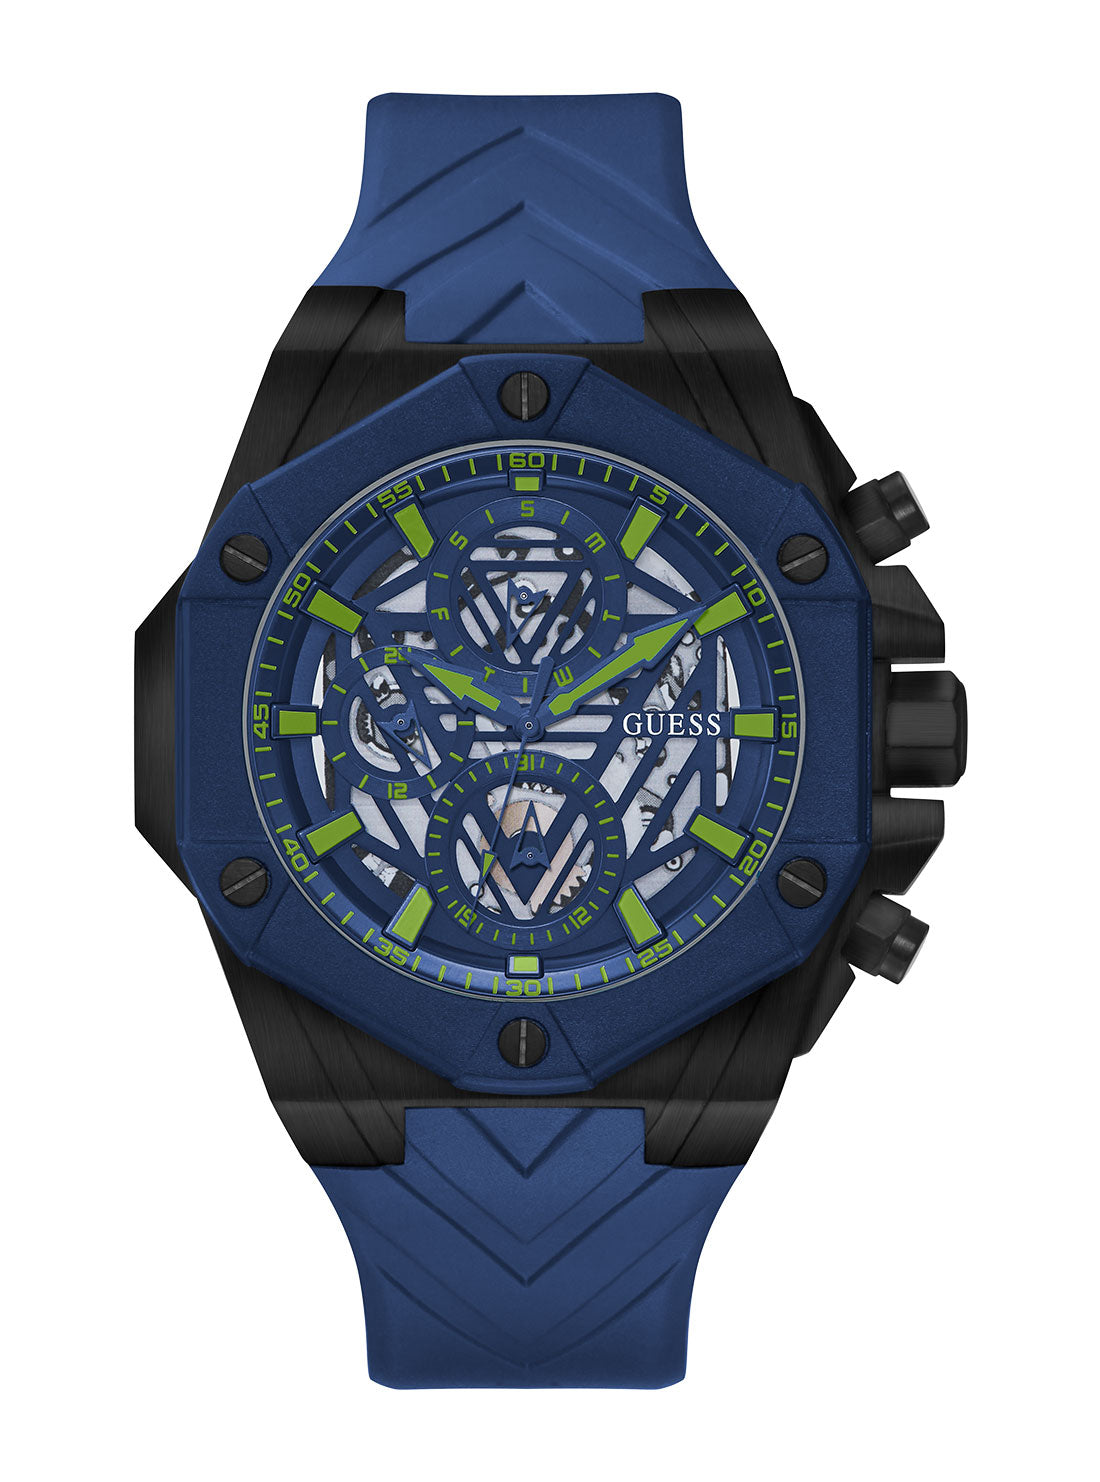 GUESS Men's Blue Formula Silicone Watch GW0579G3 Front View